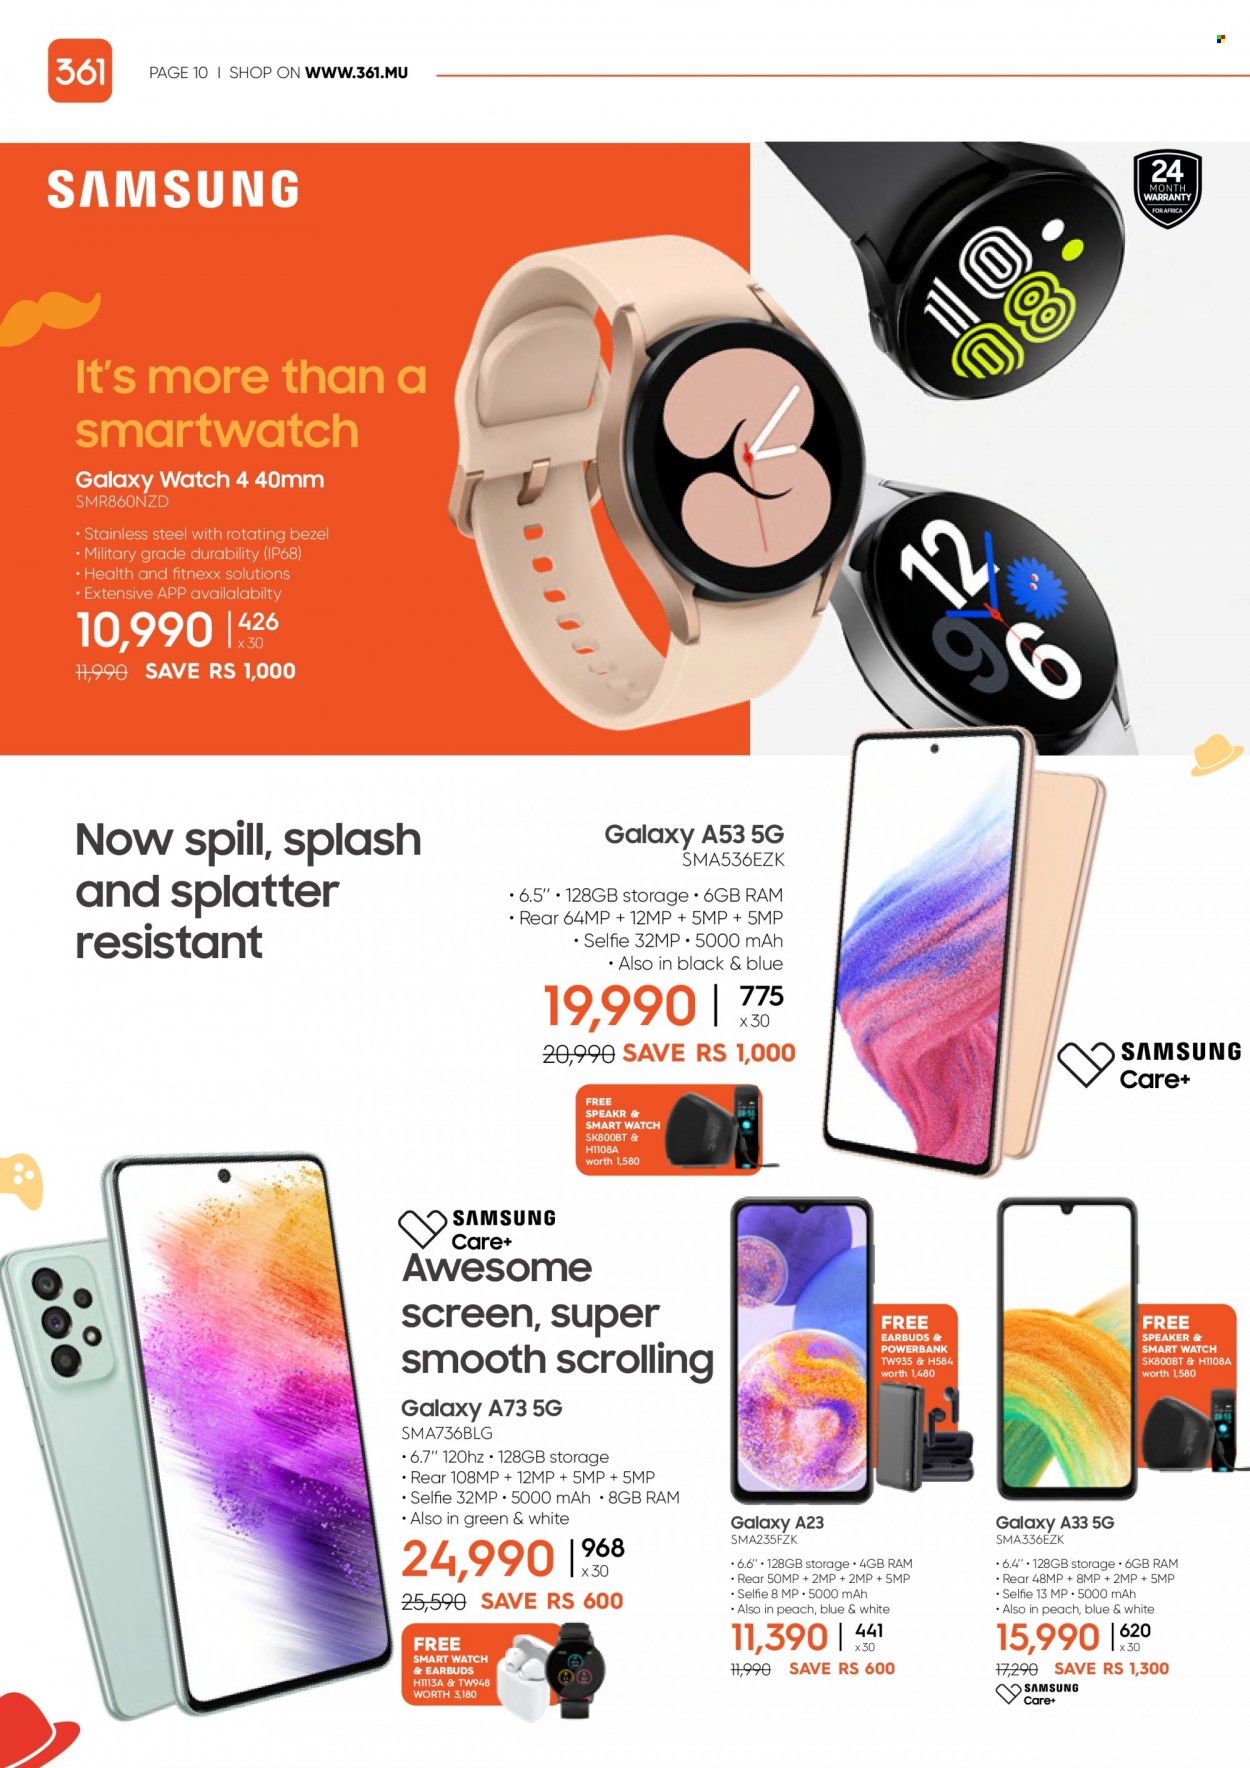 thumbnail - 361 Catalogue - 14.06.2022 - 23.06.2022 - Sales products - Samsung Galaxy, power bank, smart watch, Samsung Galaxy Watch, speaker, earbuds. Page 10.